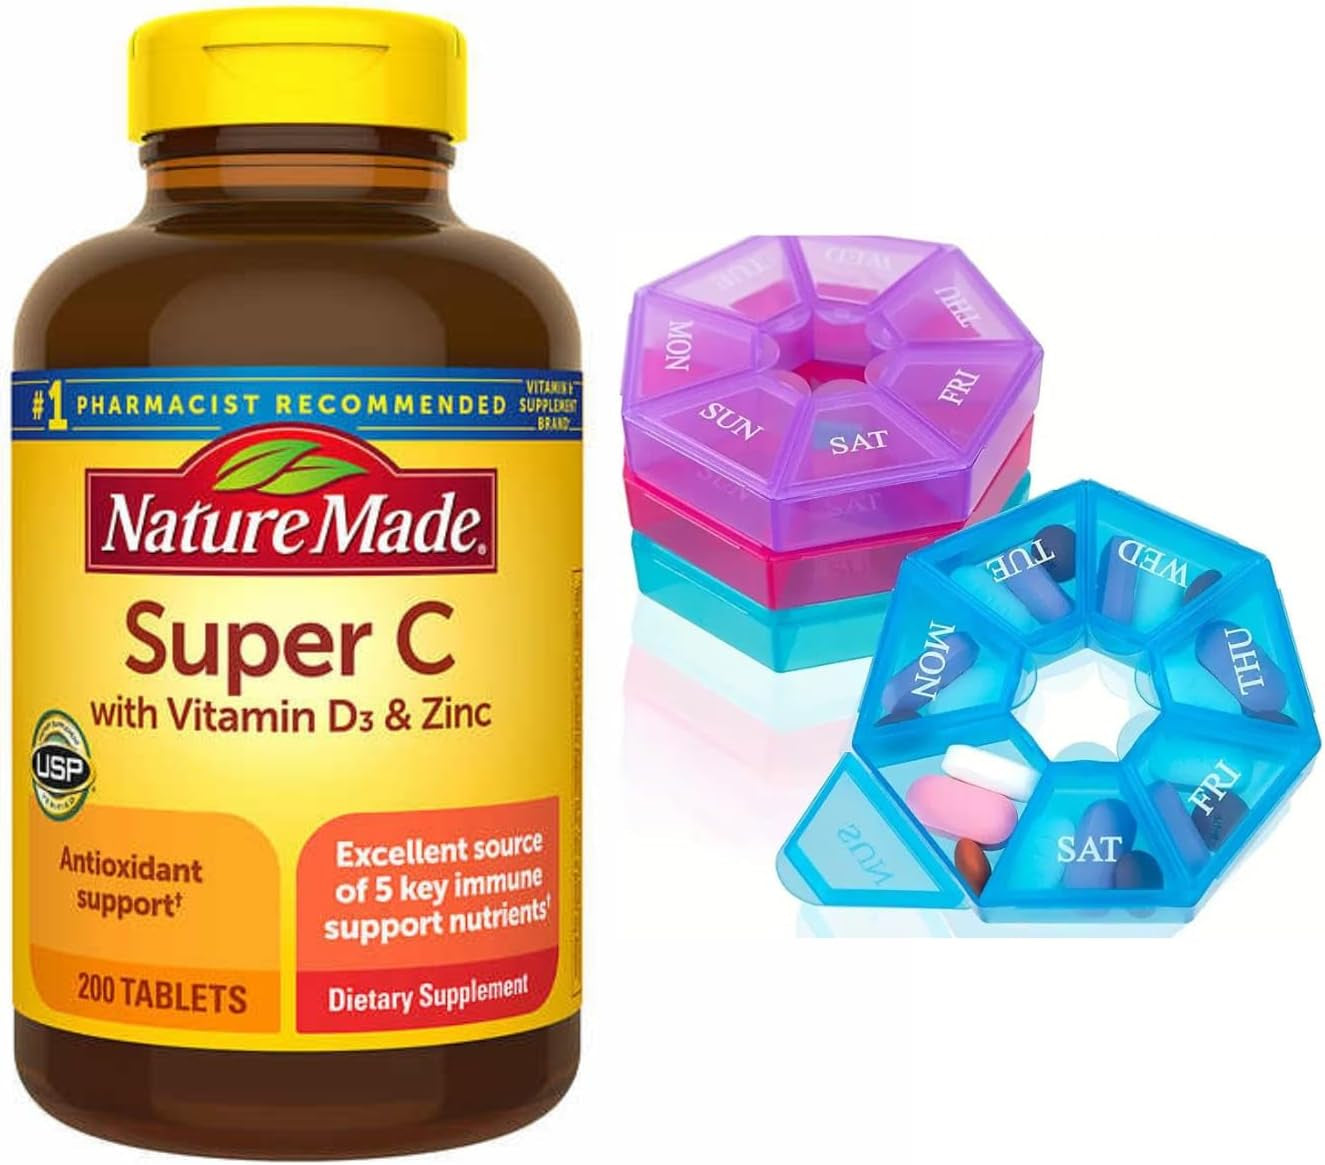 Nature Made Super C with (Vitamin D3 and Zinc), 200 Tablets, One per Day Tablet Bundle with Travel Weekly Pill Organizer (Assorted Color)